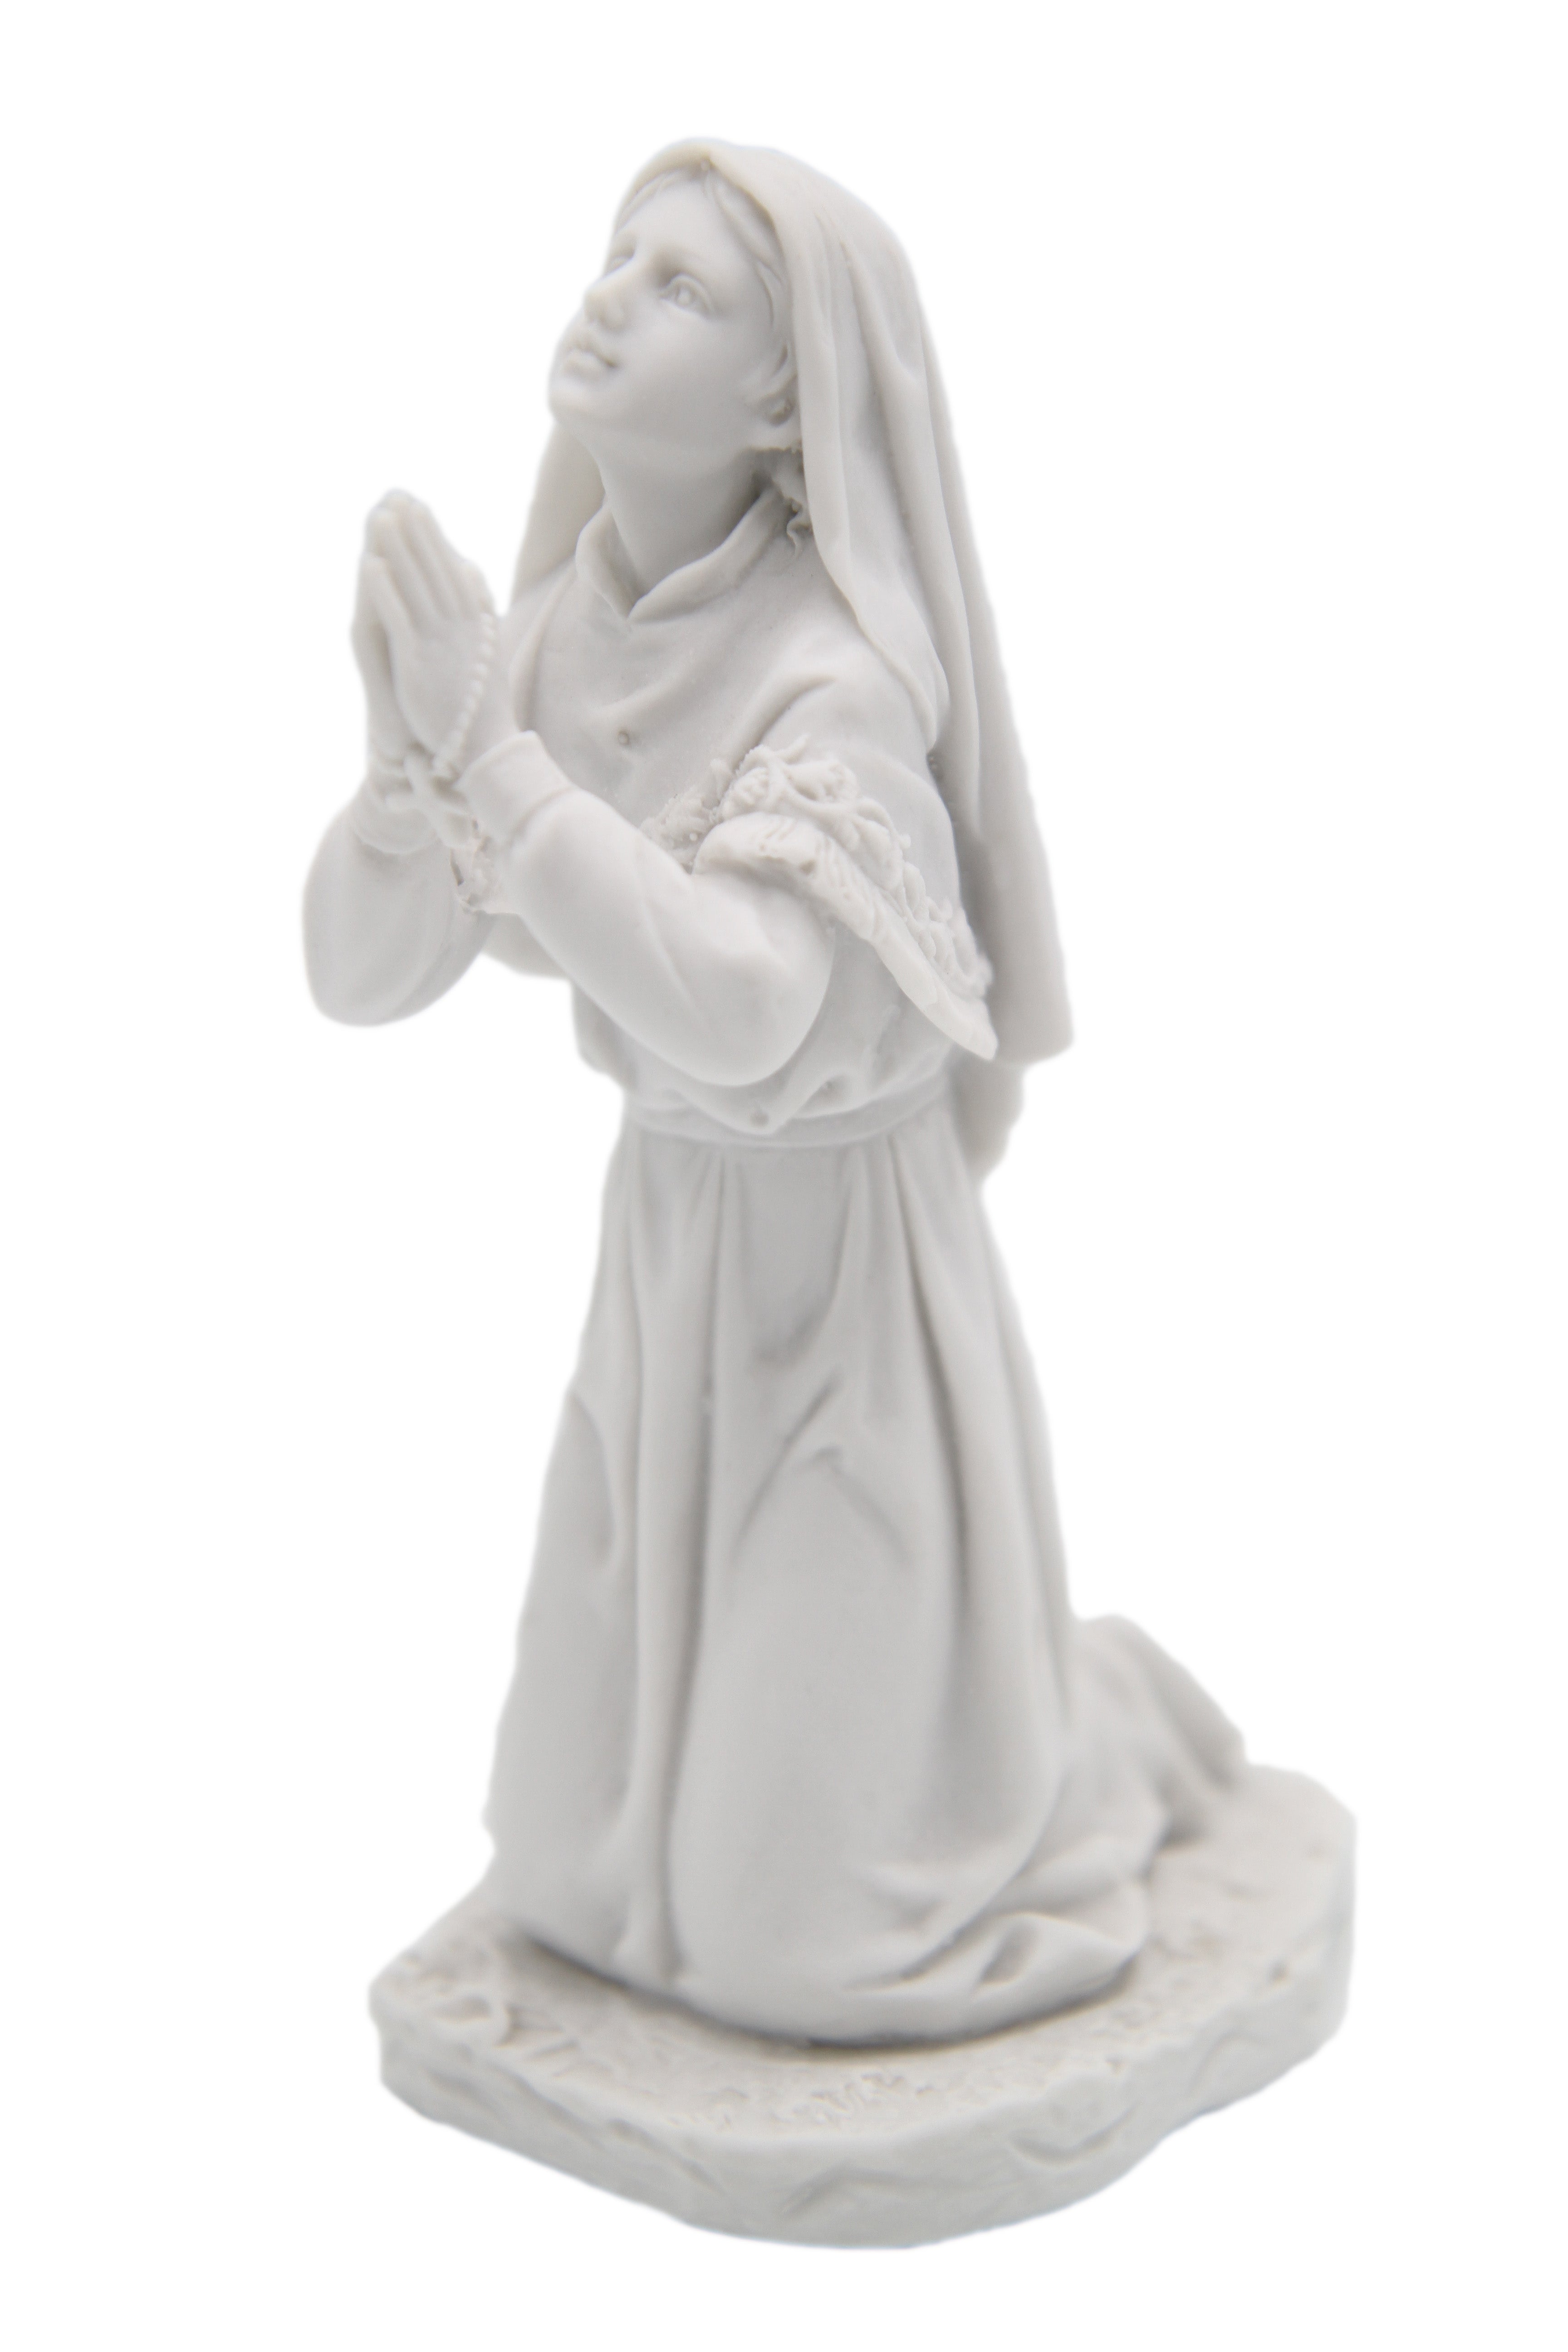 6.25 Inch Saint St. Bernadette of Lourdes Statue Catholic Figurine Vittoria Collection Made in Italy